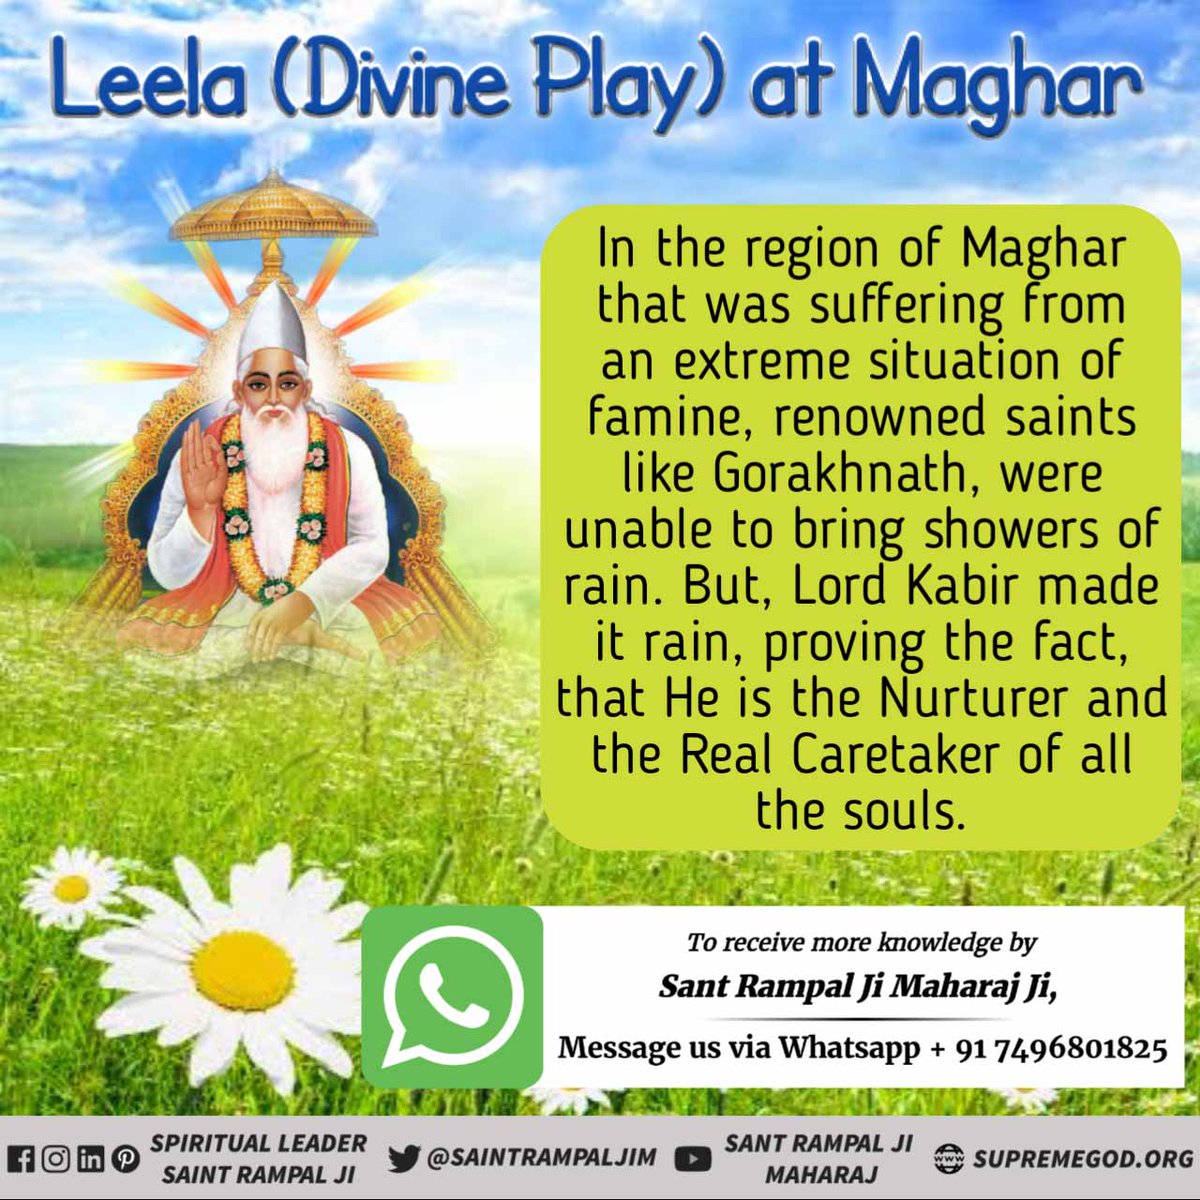 #ऐसे_सुख_देता_है_भगवान Leela (Divine Play) at Maghar
In the region of Maghar that was suffering from an extreme situation of famine, renowned saints like Gorakhnath, were unable to bring showers of rain. But, Lord Kabir made it rain, proving the fact, that He is the Nurturer &